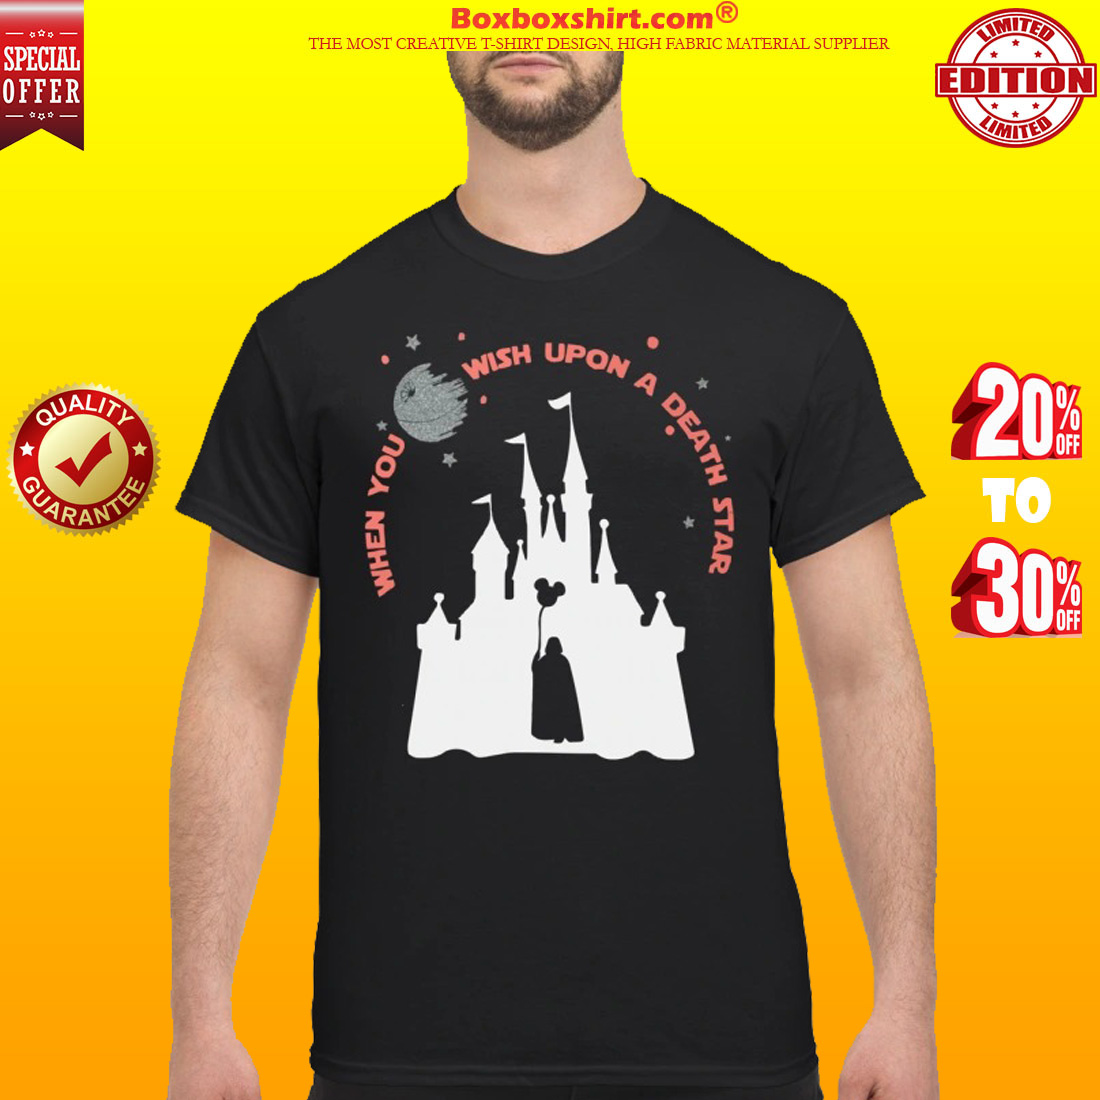 When you wish upon a death star classic shirt